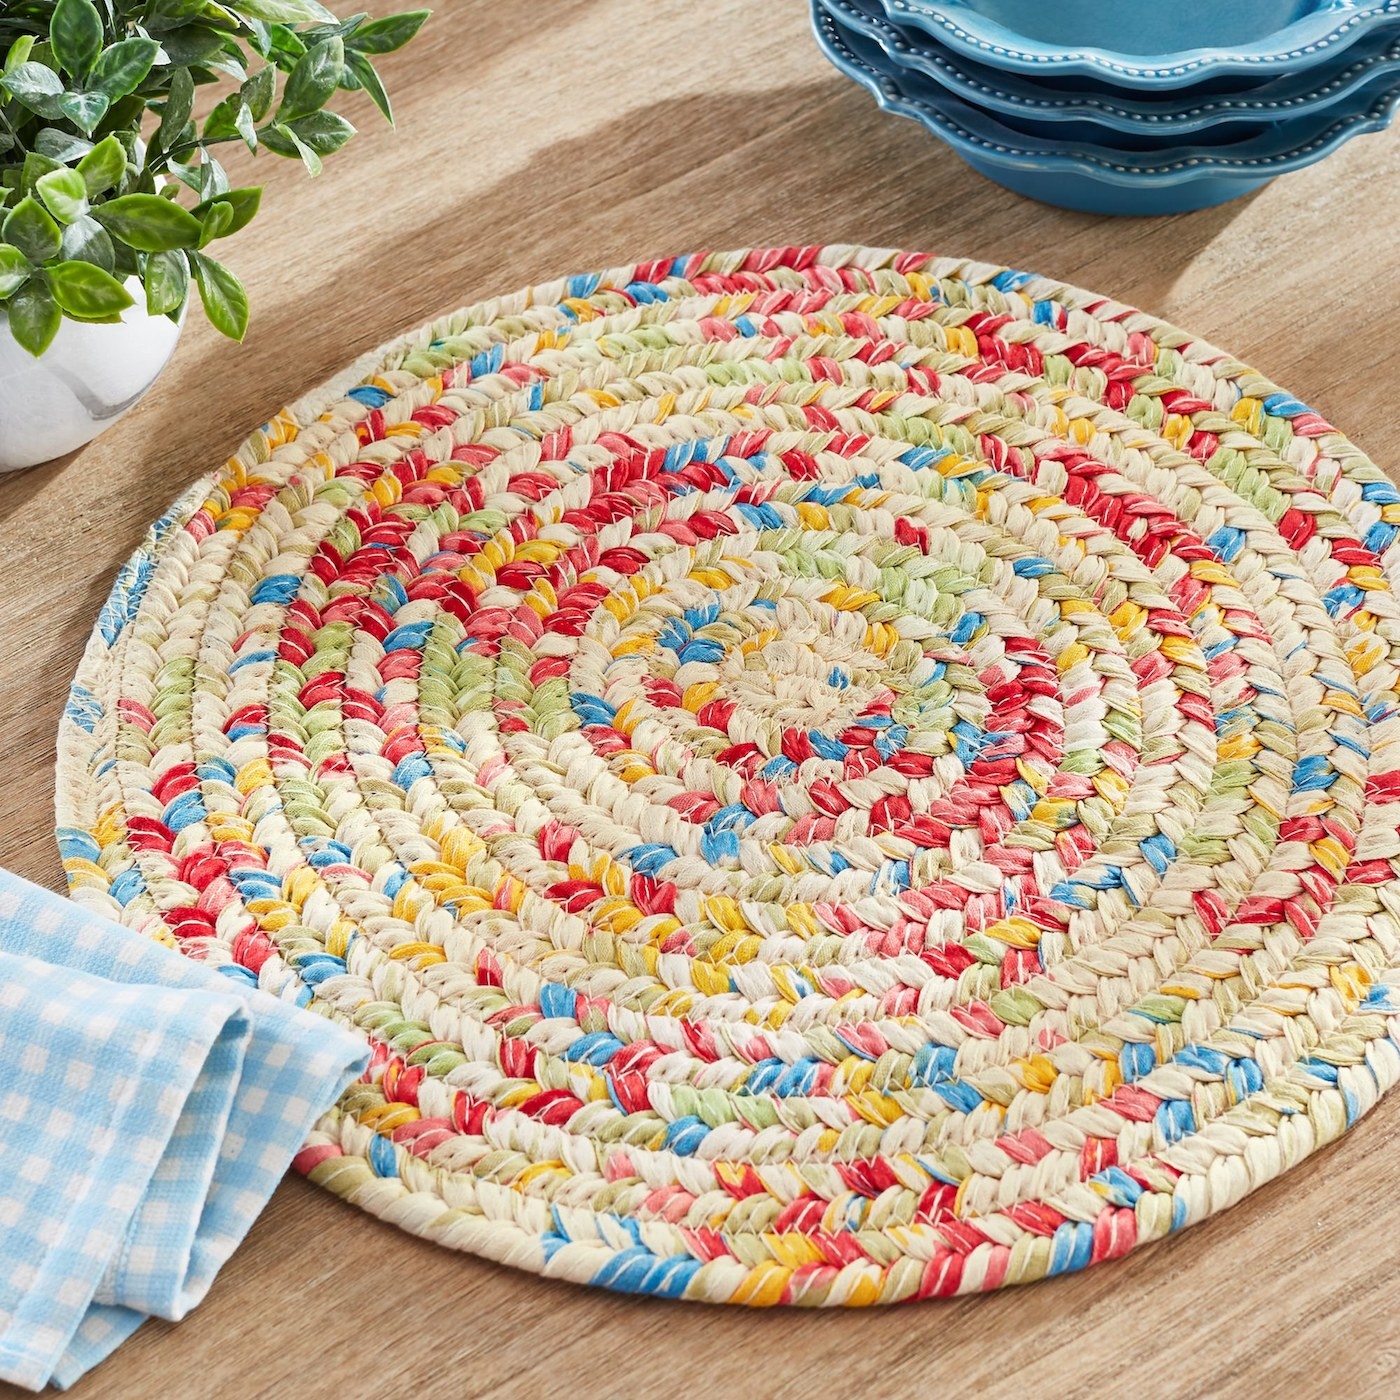 The round placemat with a multi-colored pattern on a table